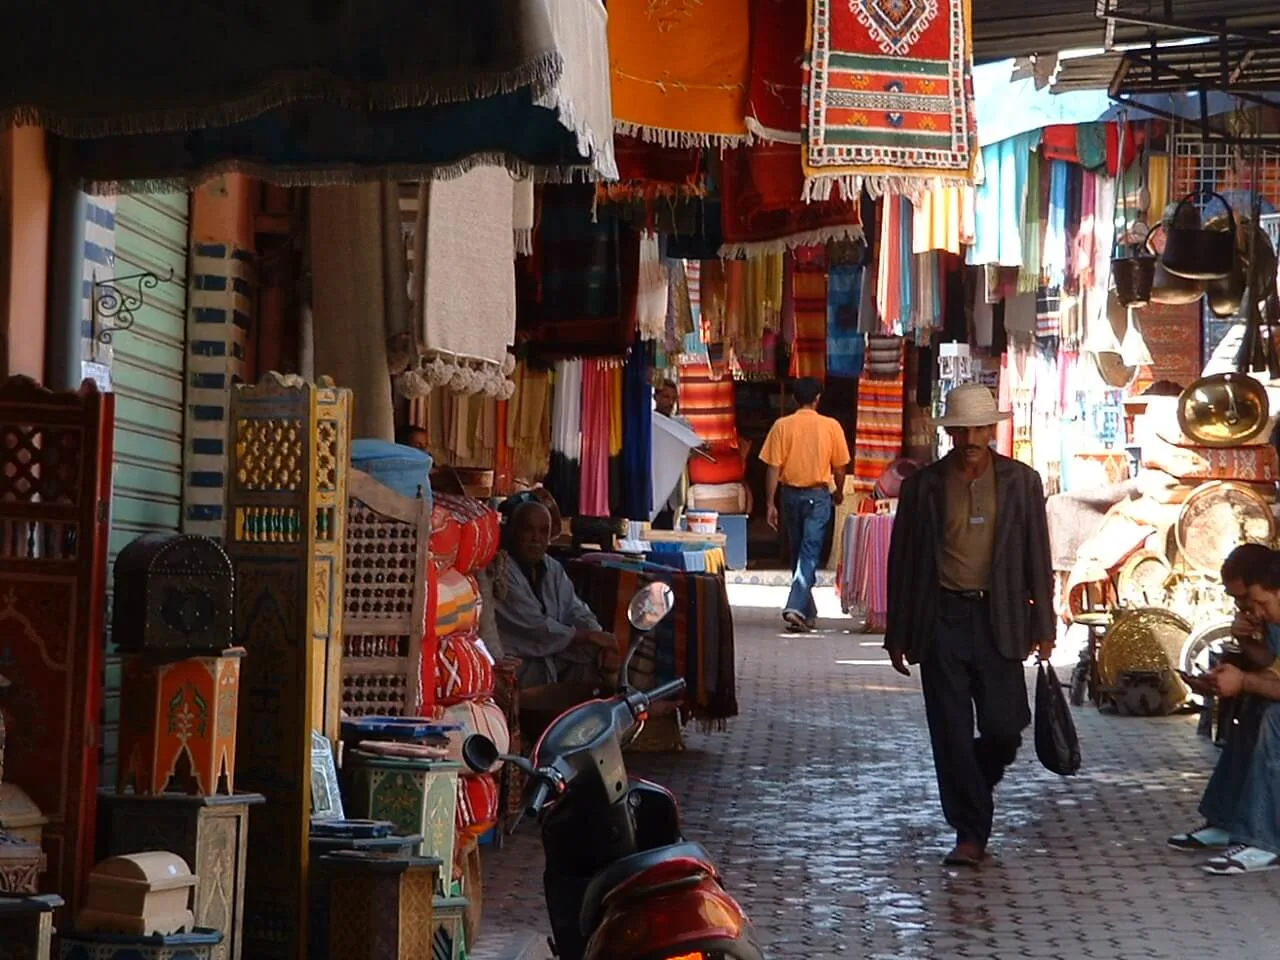 A market in Morocco